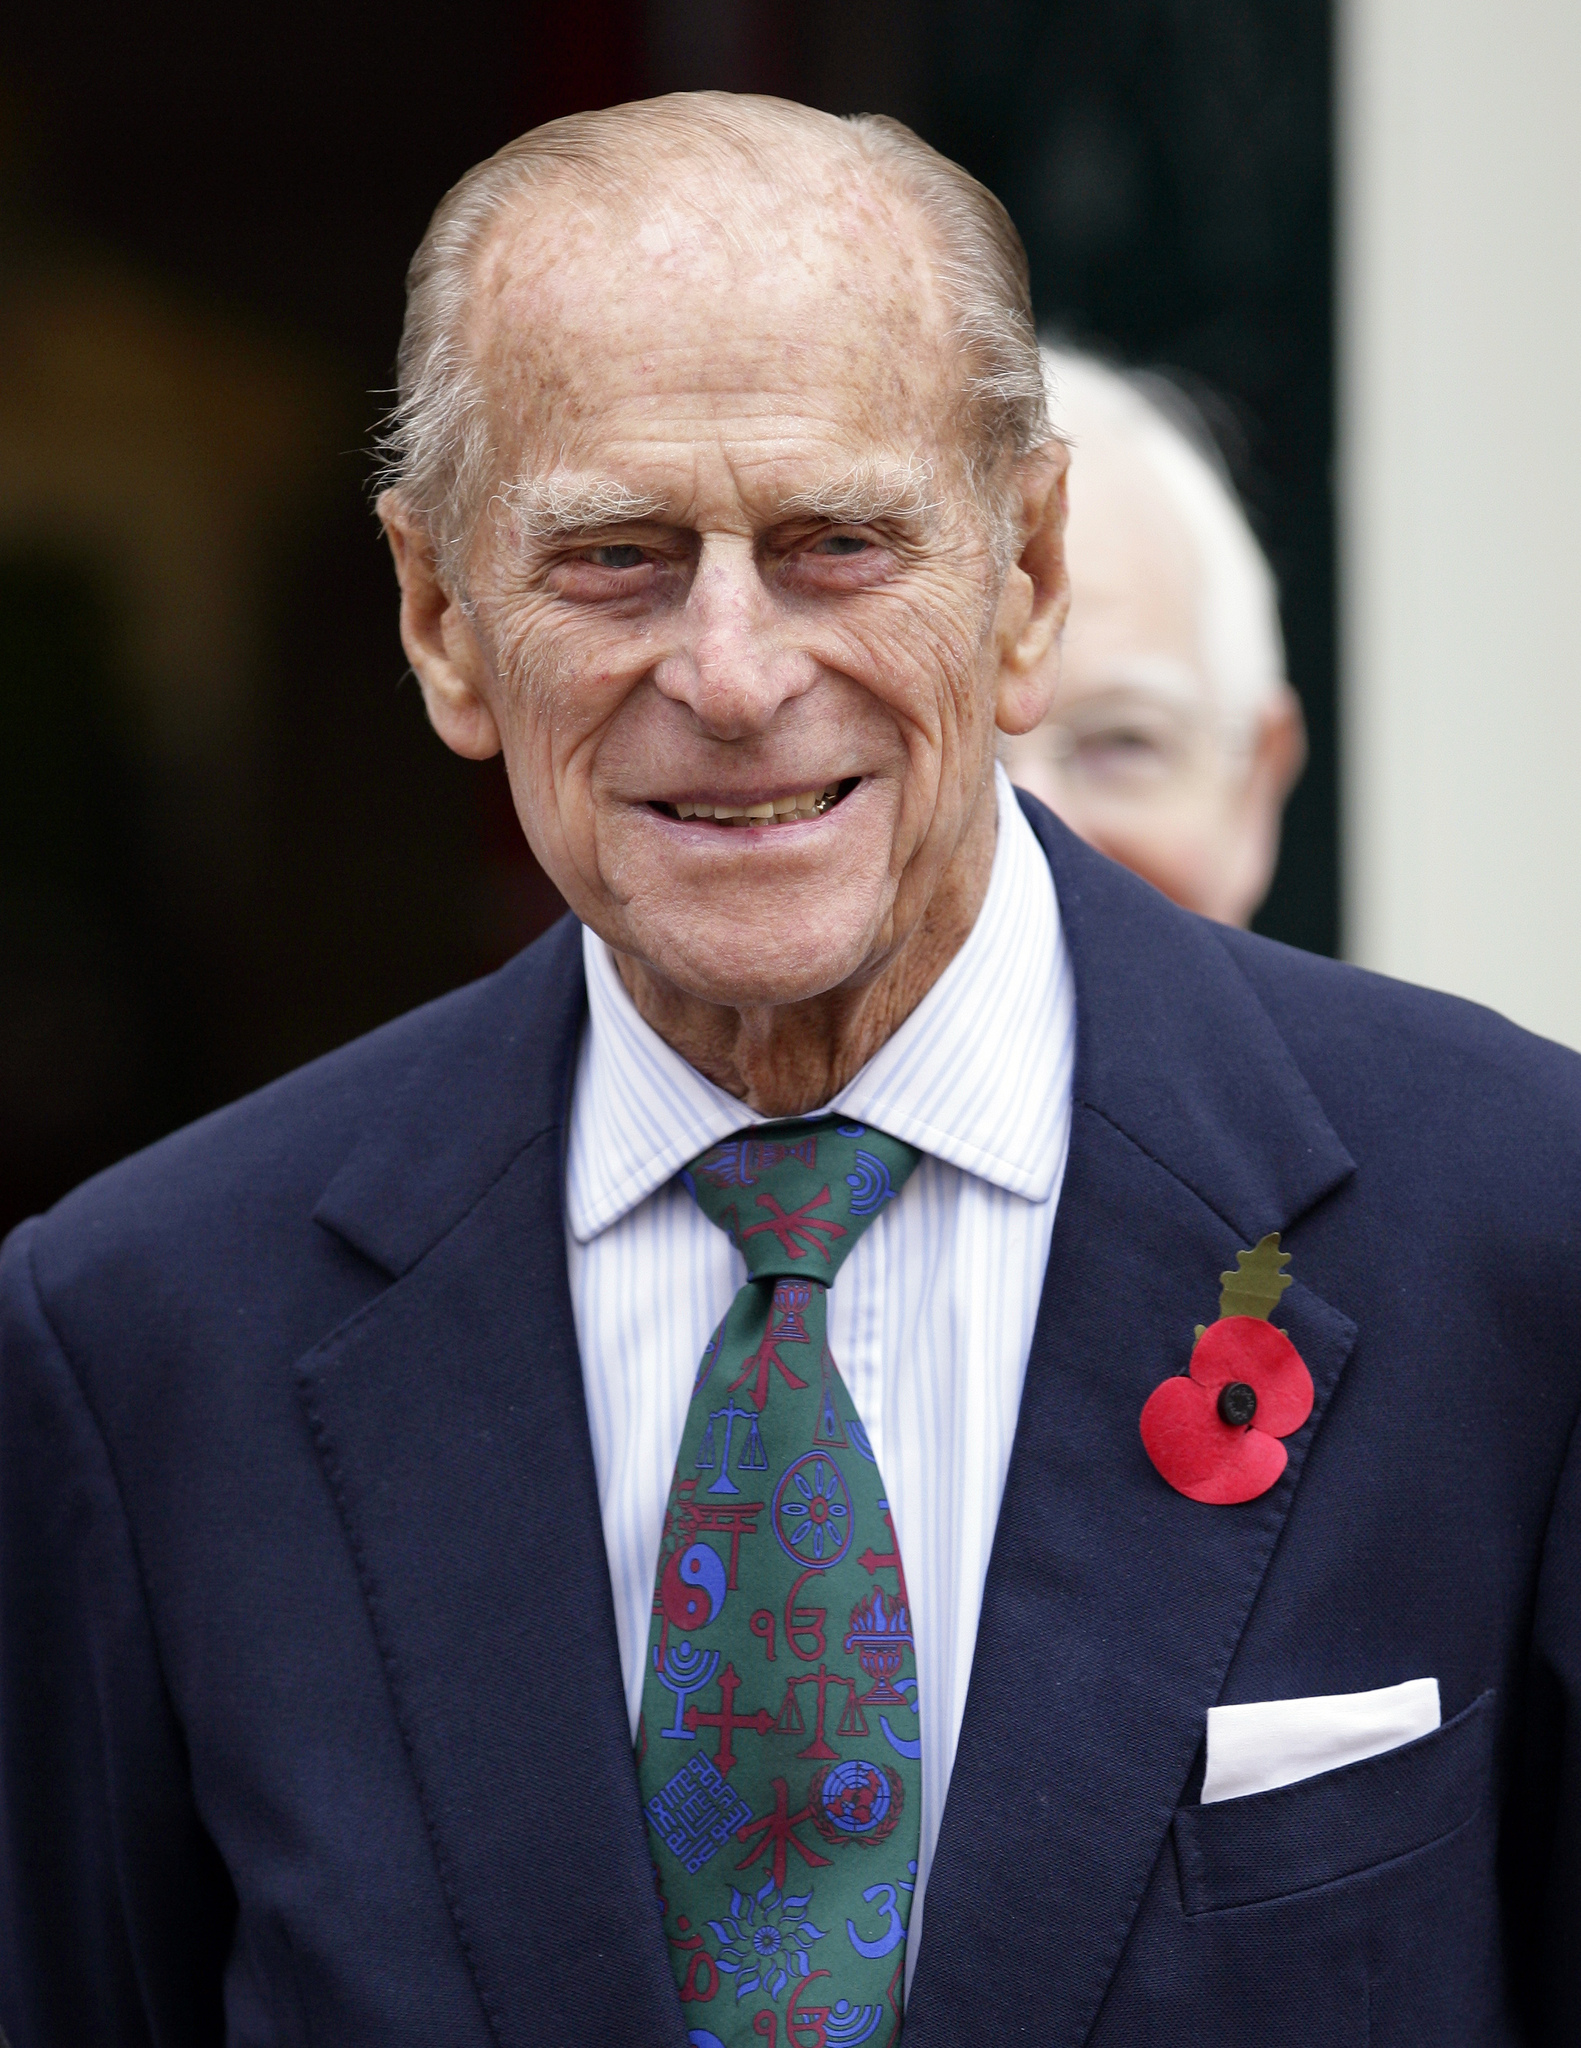 Prince Philip is not dead